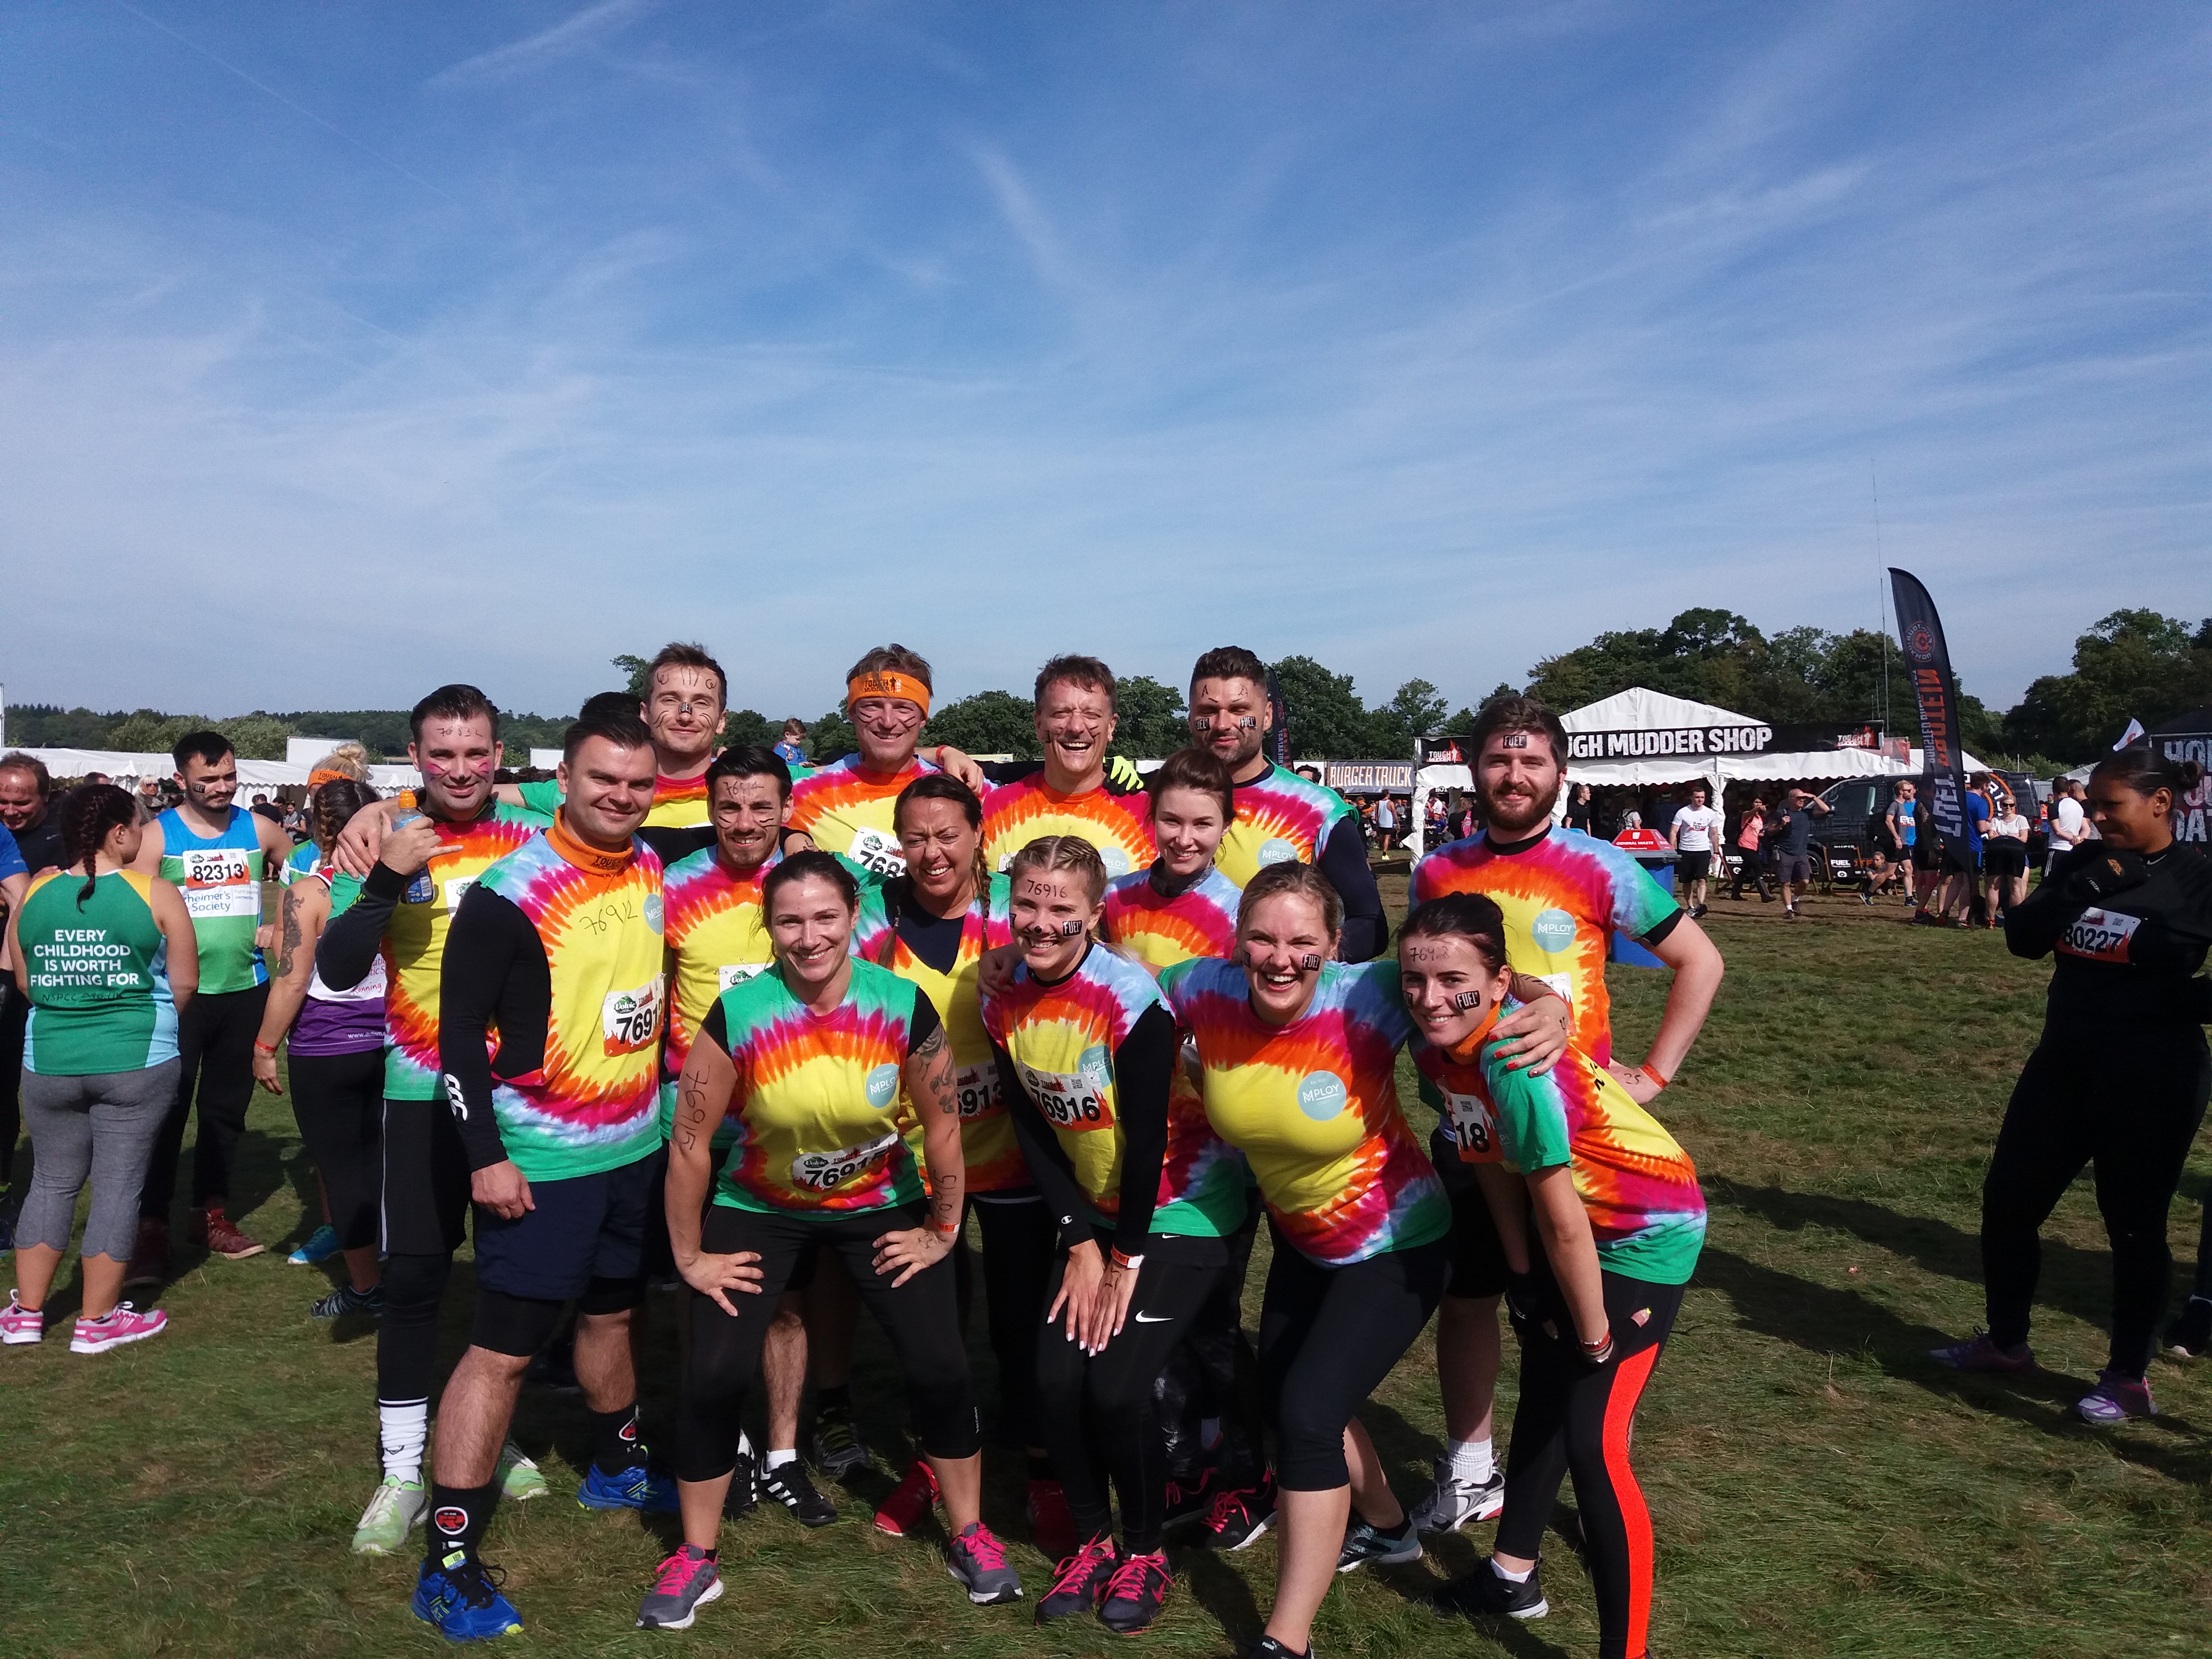 Mploy Survived the Tough Mudder challenge